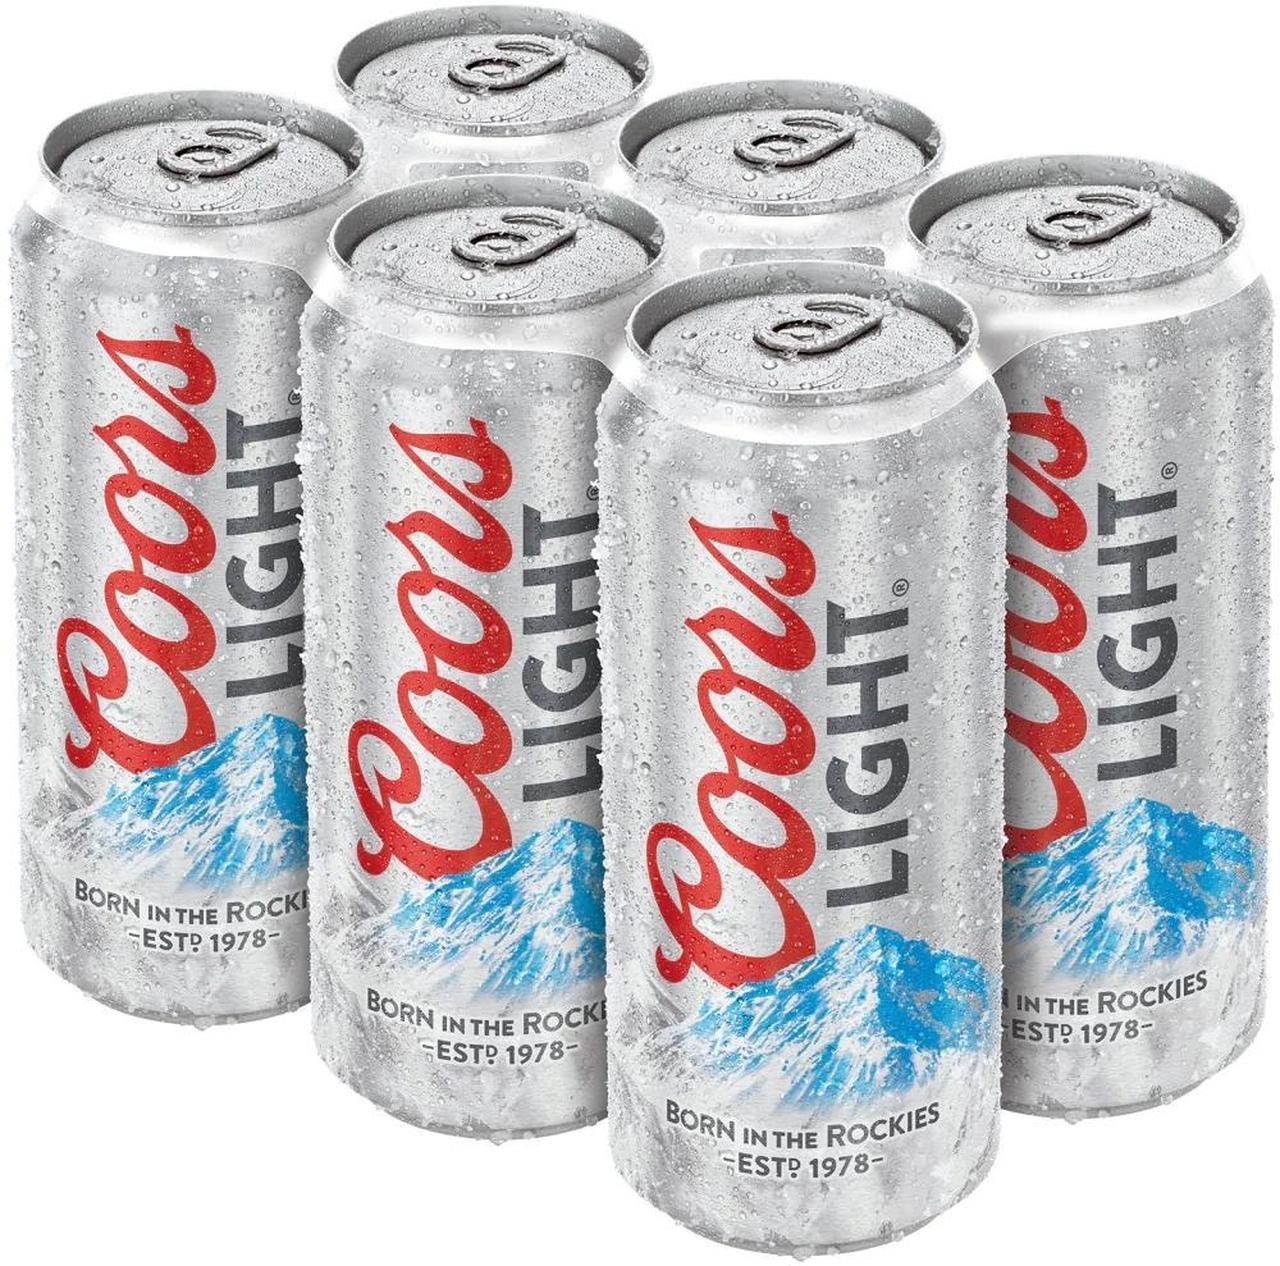 bvi>Coors Lite Beer, 6 pack 12 oz cans